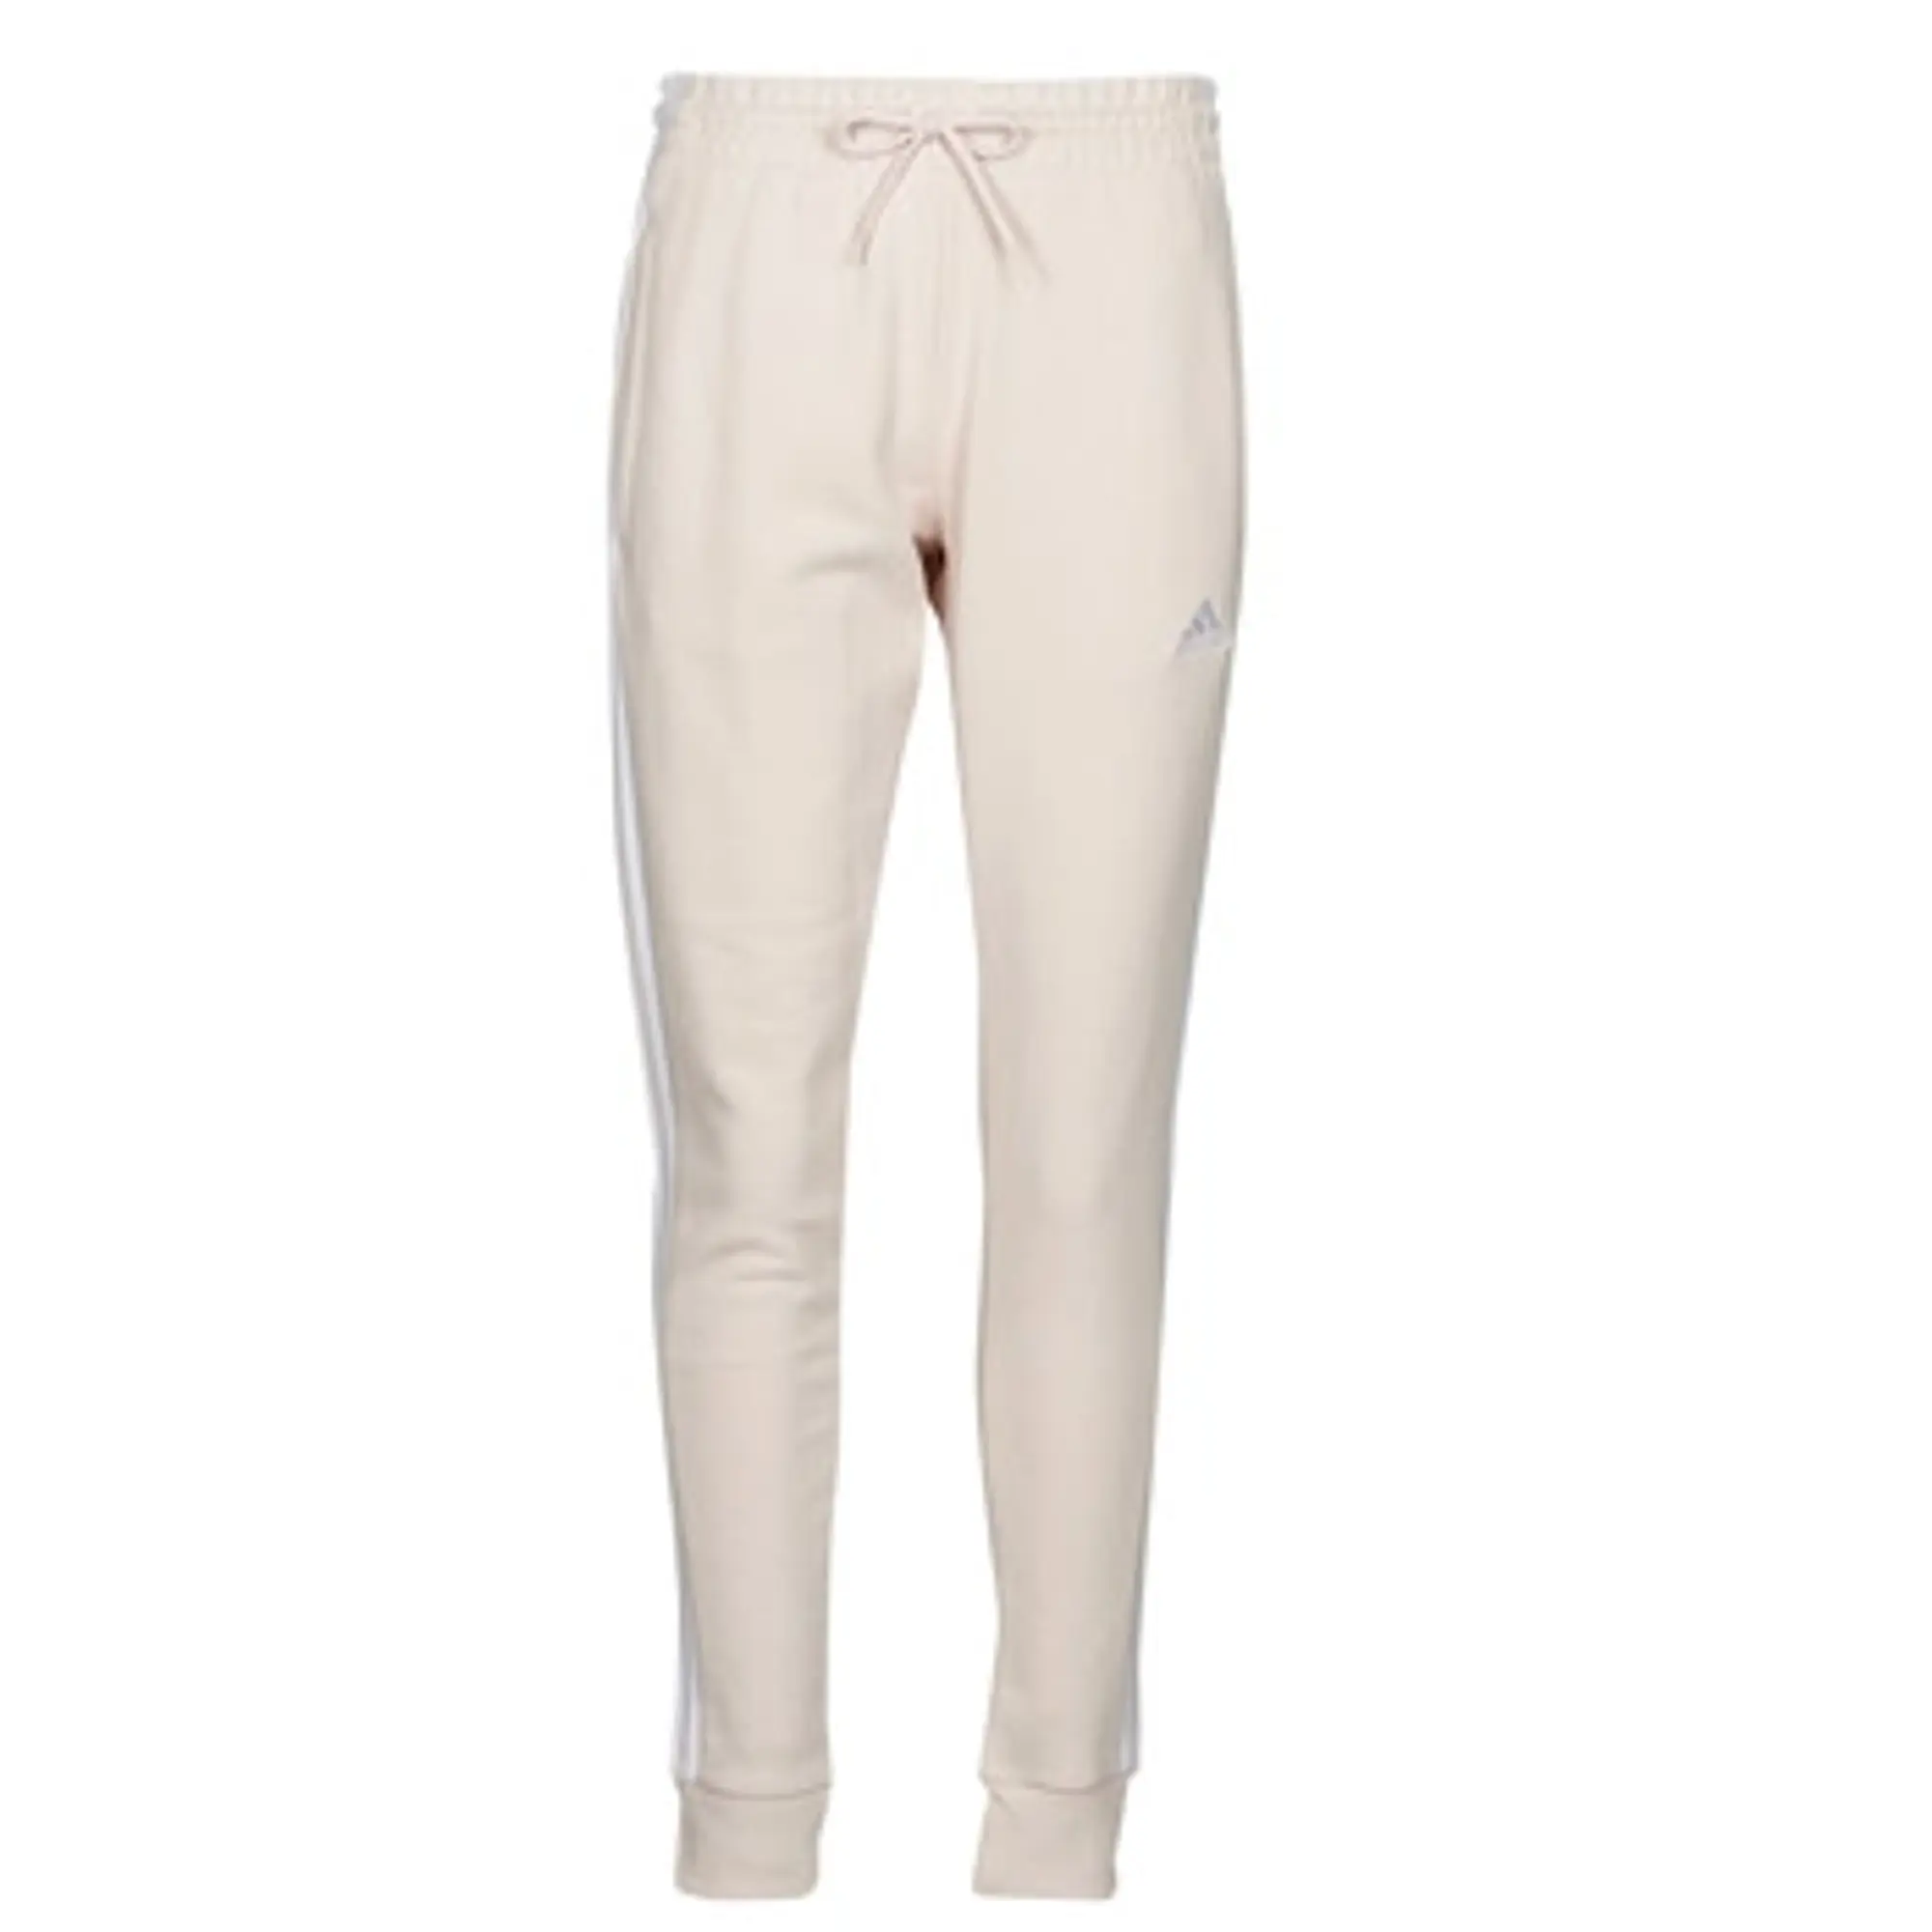 adidas Essentials 3-Stripes French Terry Womens Jog Pant - Pink